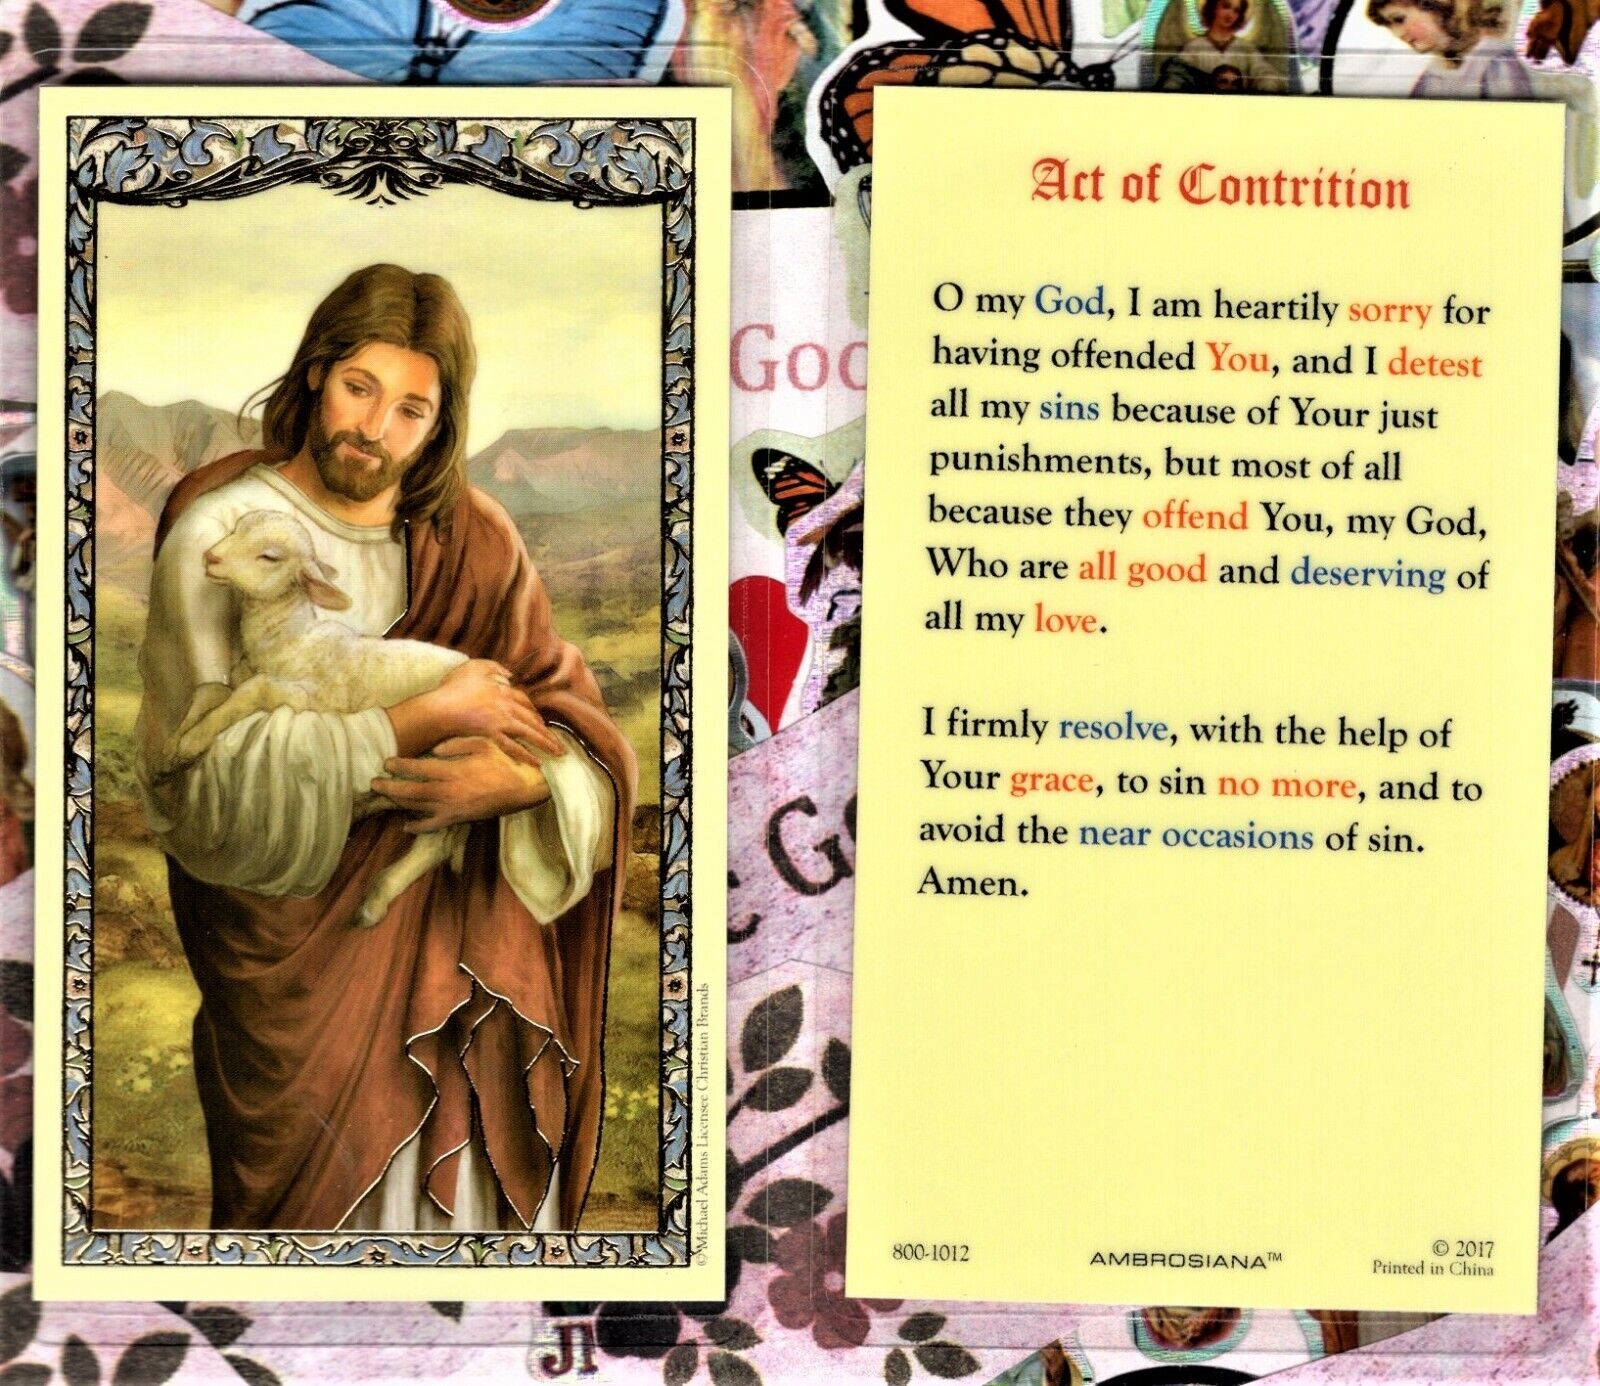 Act of Contrition Prayer - Laminated Holy Card 800-1012